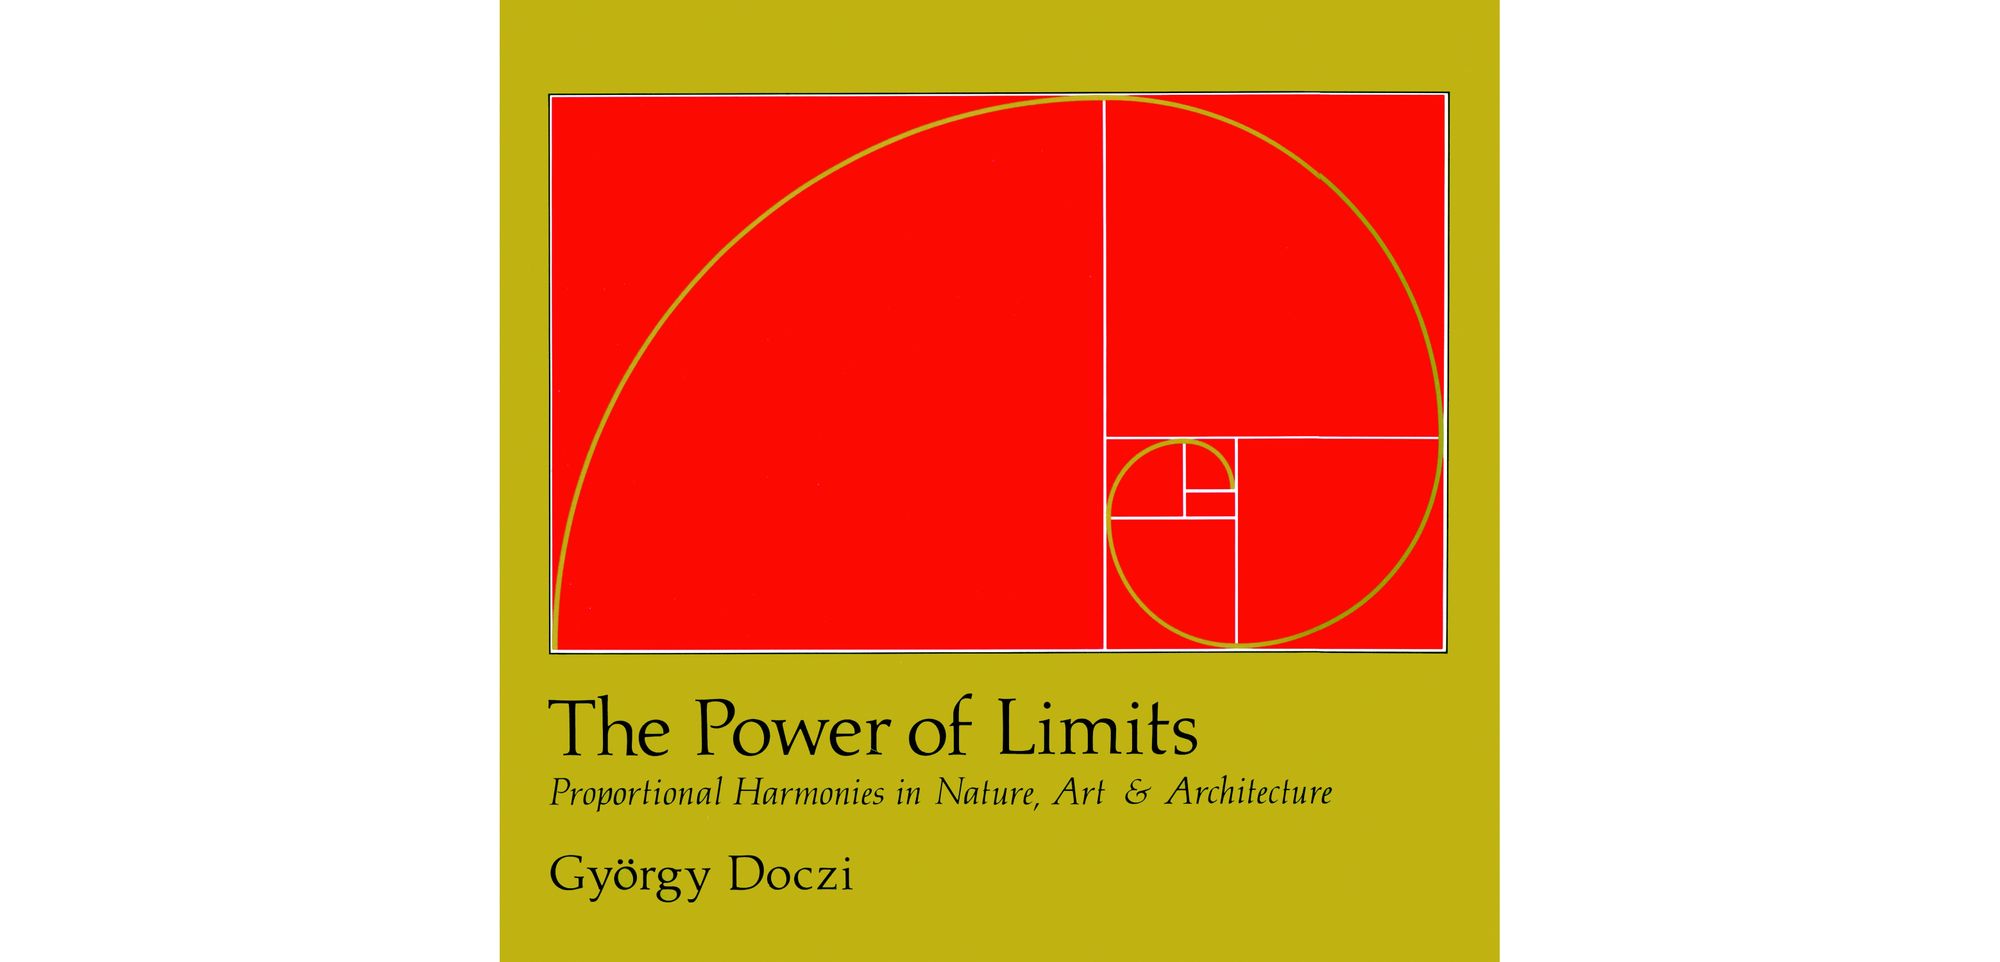 Image of The Power of Limits, by György Doczi